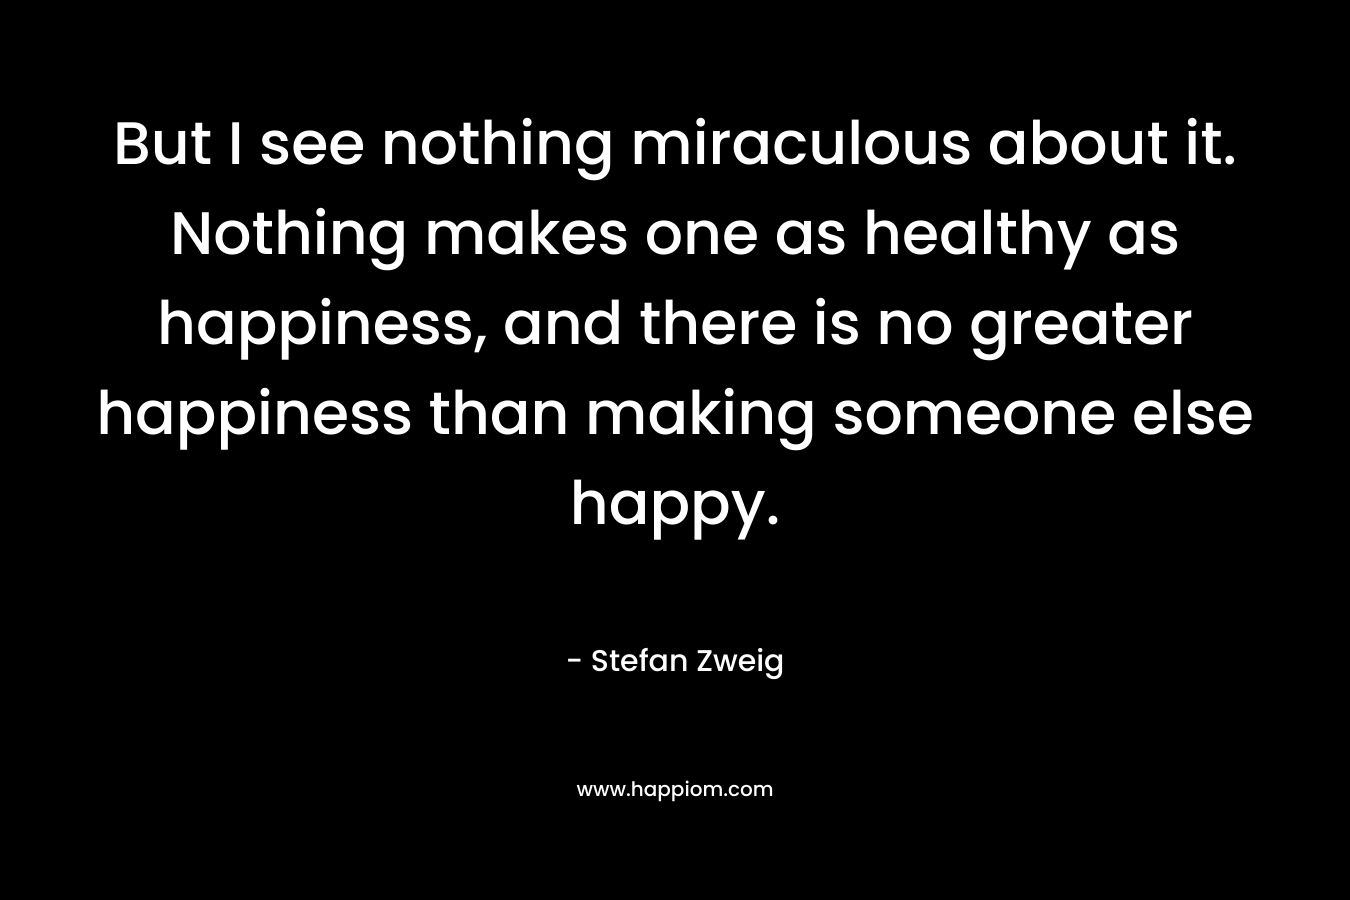 But I see nothing miraculous about it. Nothing makes one as healthy as happiness, and there is no greater happiness than making someone else happy. – Stefan Zweig